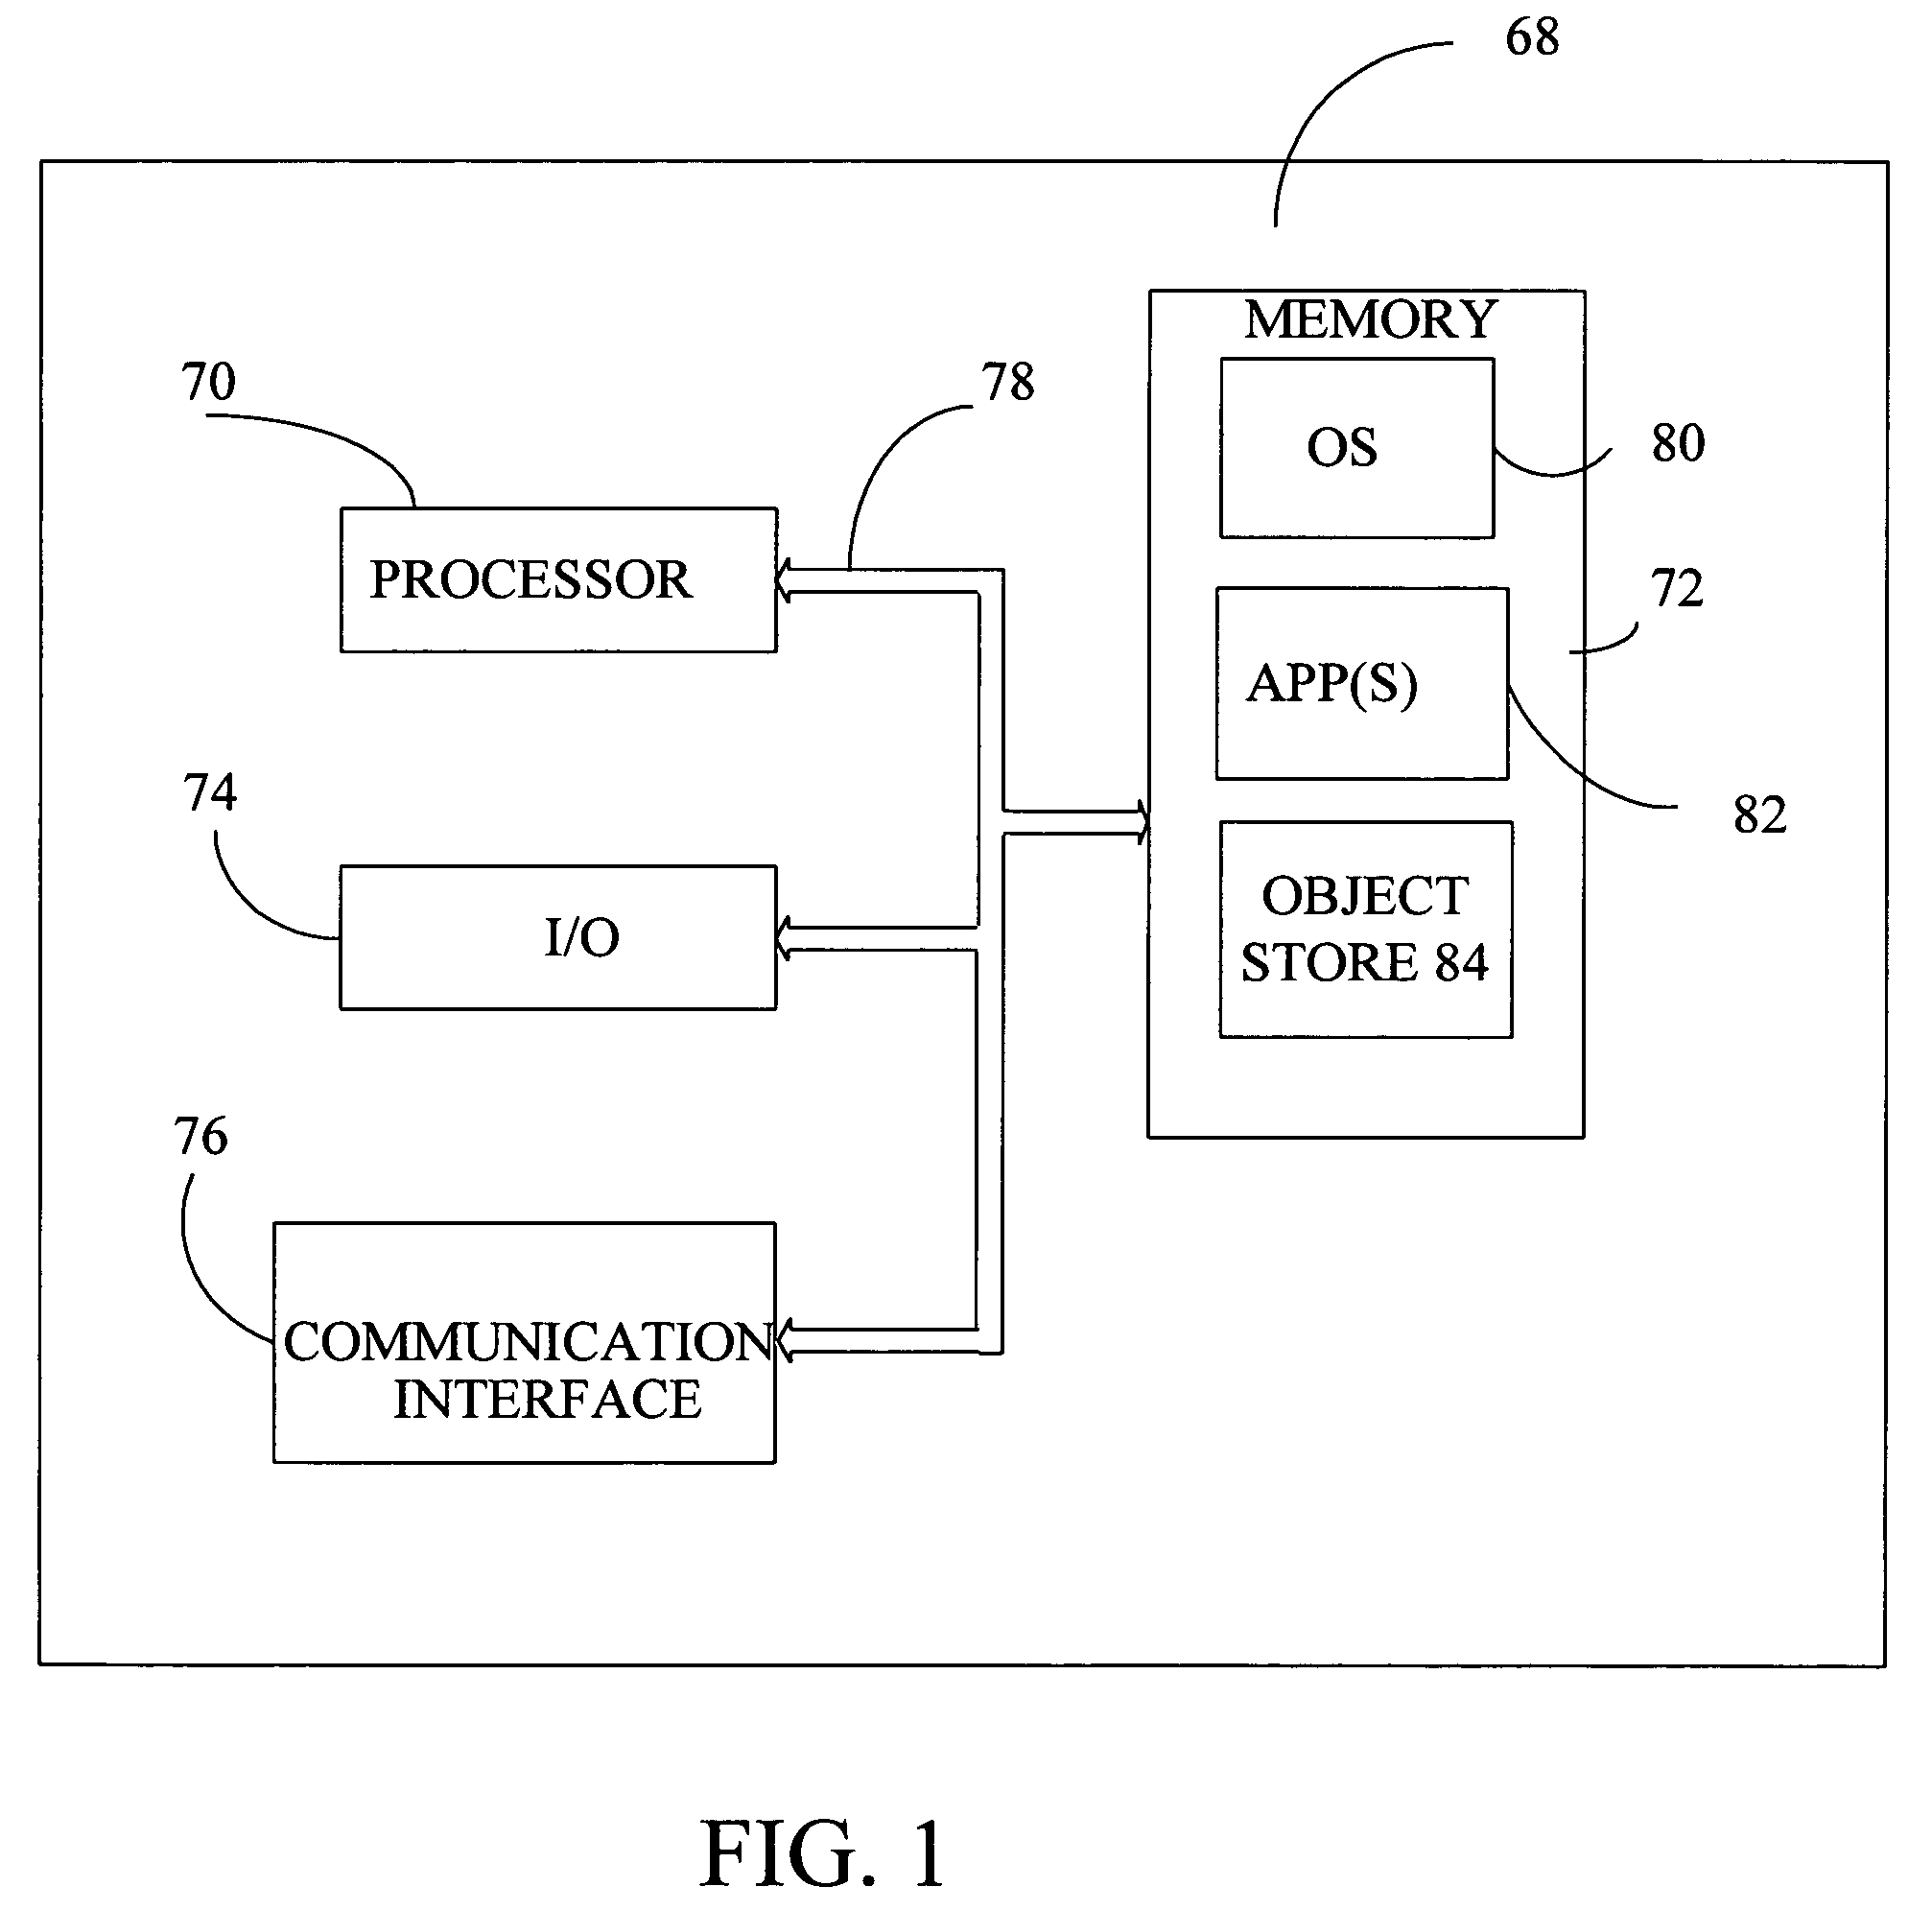 Method and apparatus for providing context menus on a hand-held device